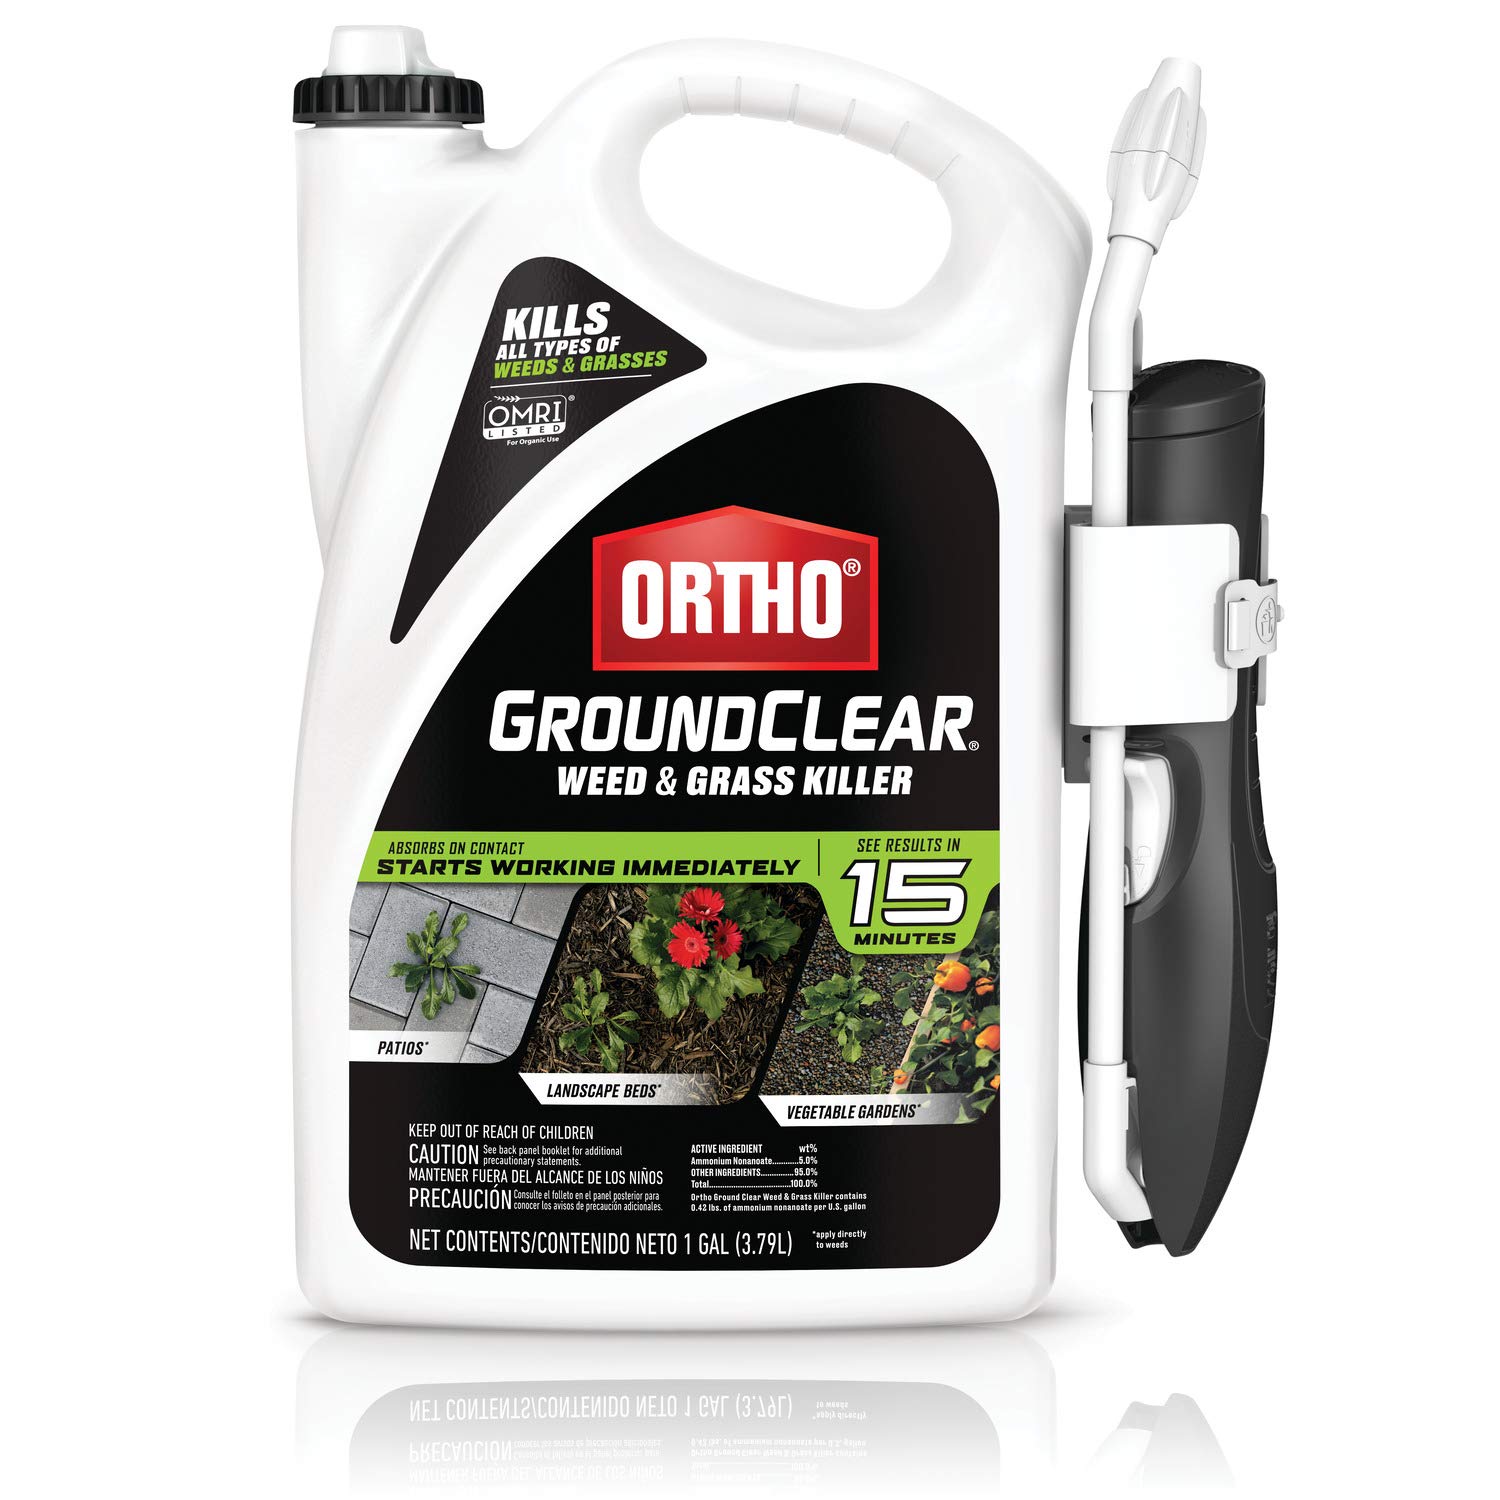 How Ortho Ground Clear Weed Killer Can Help You Achieve a Beautiful Lawn